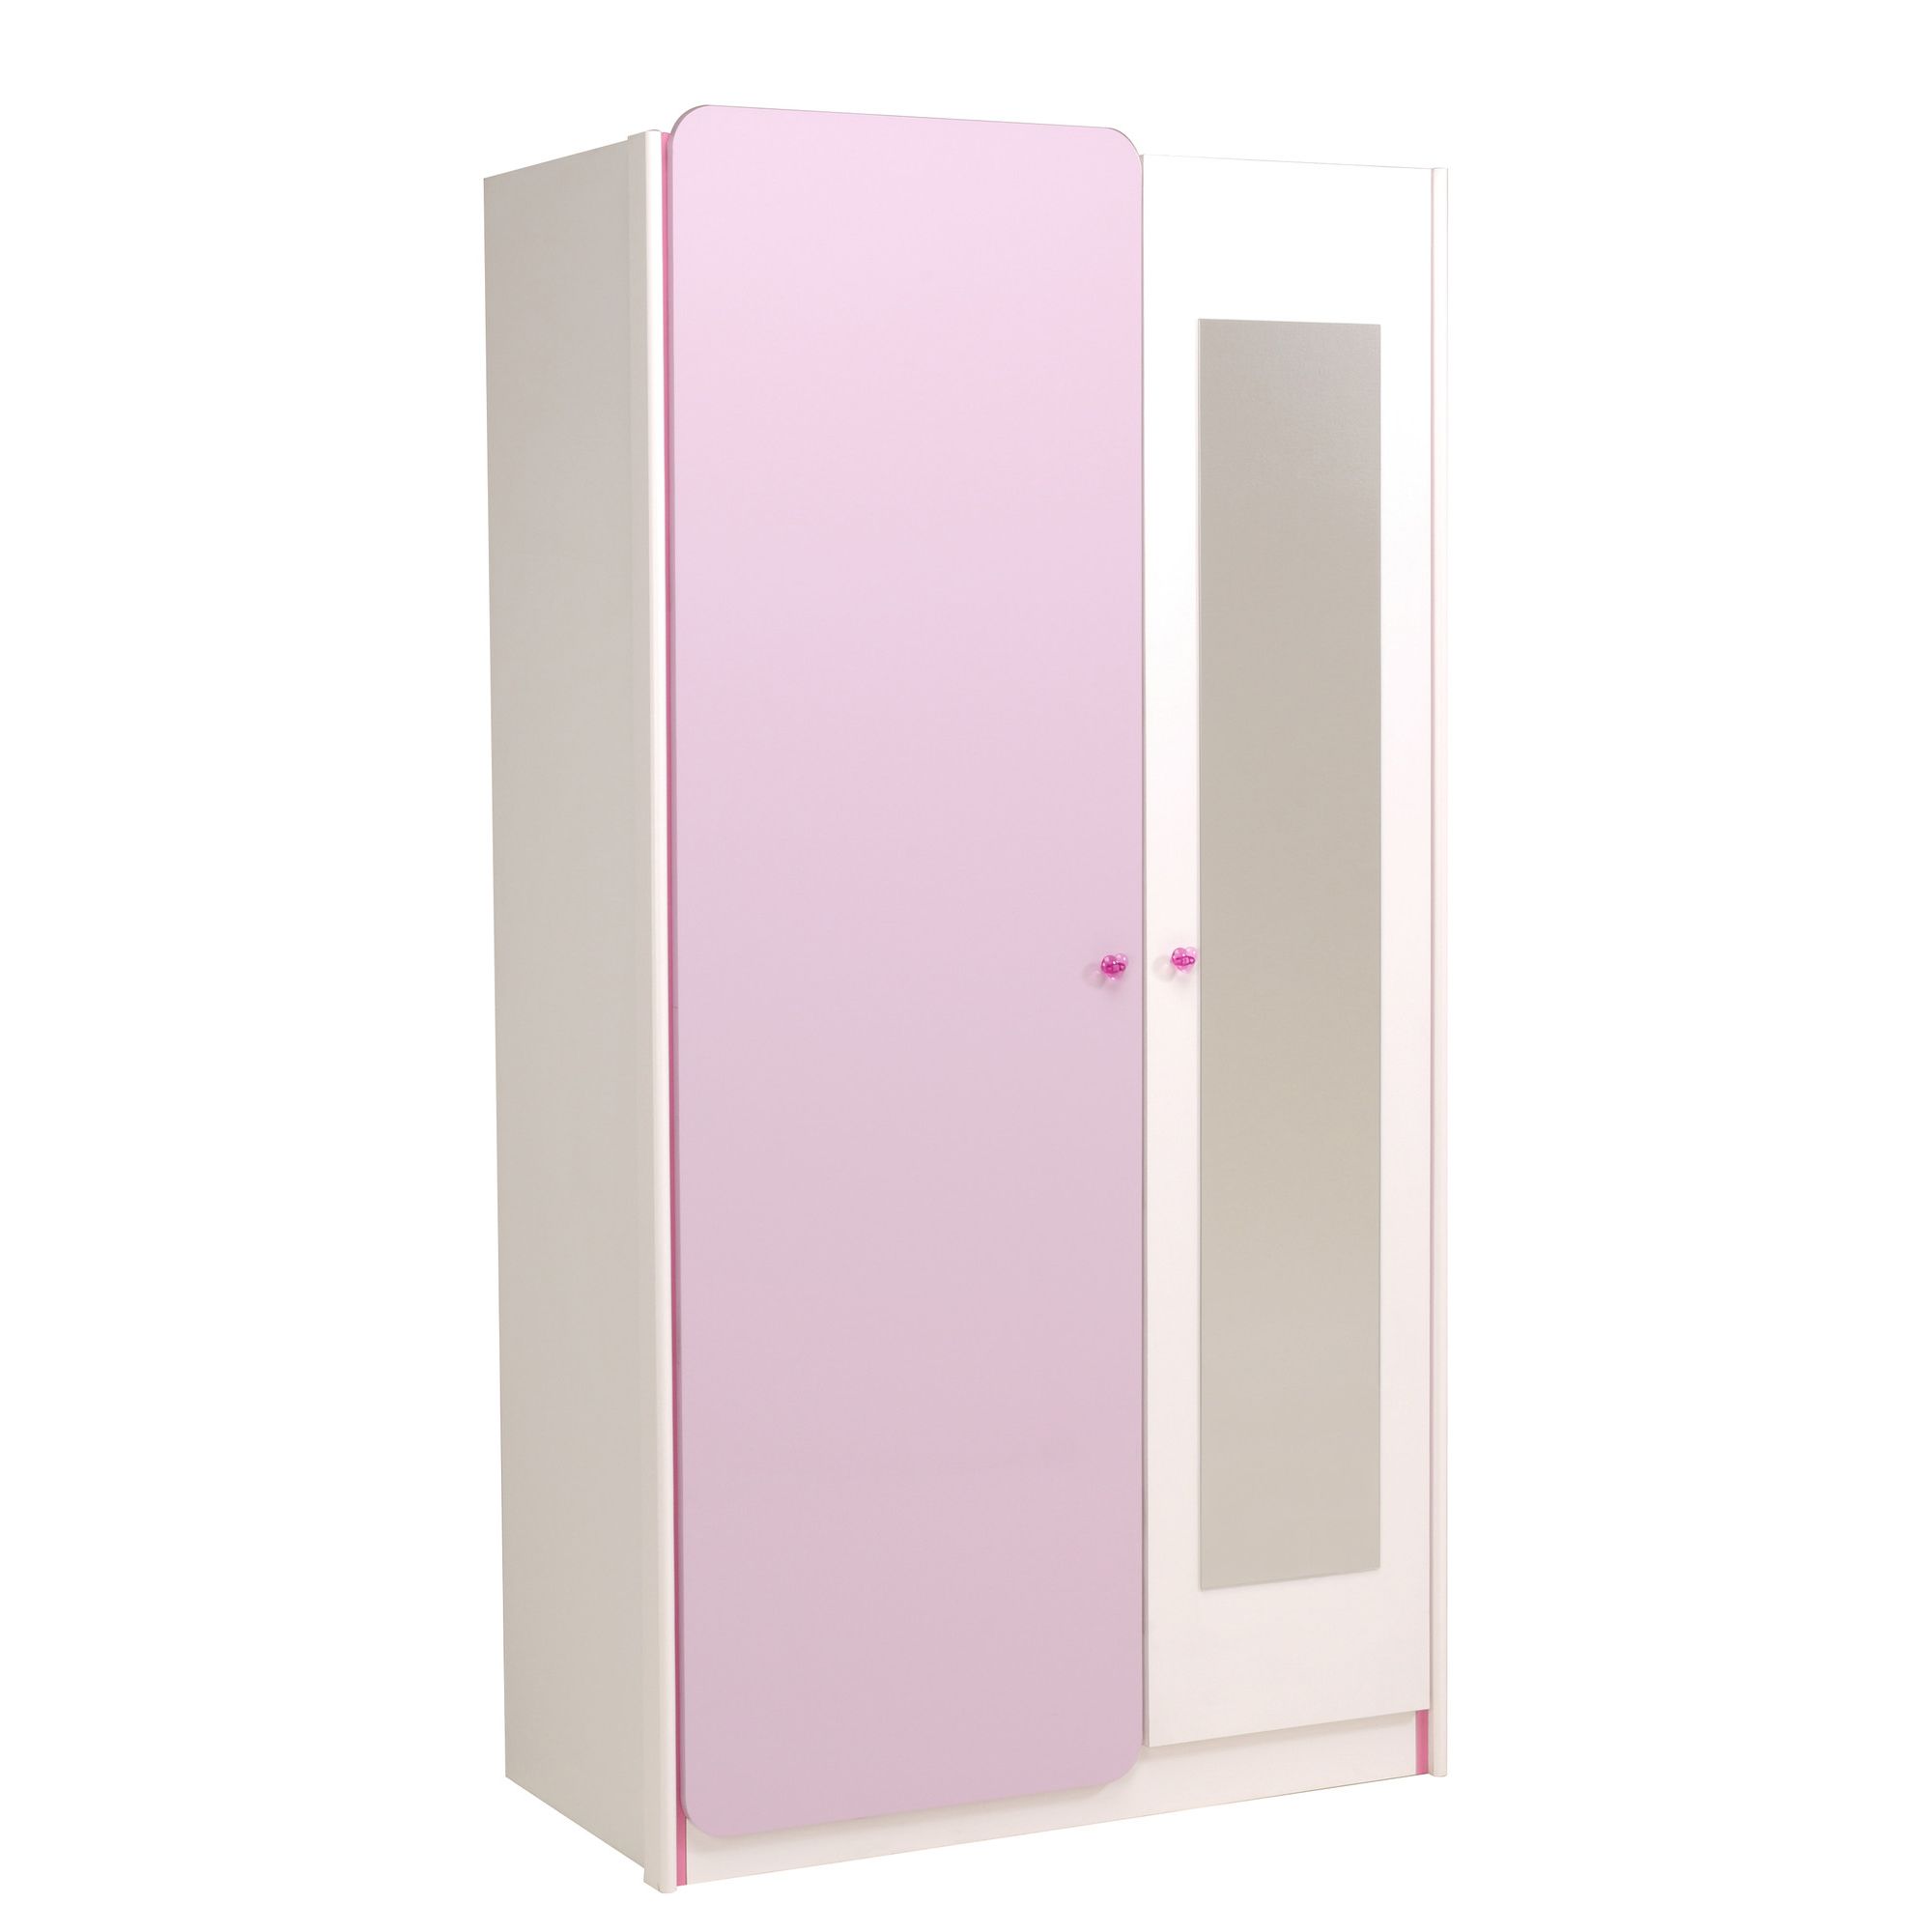 Parisot Mademoiselle Two Door Wardrobe in Purple / Megeve White at Tesco Direct